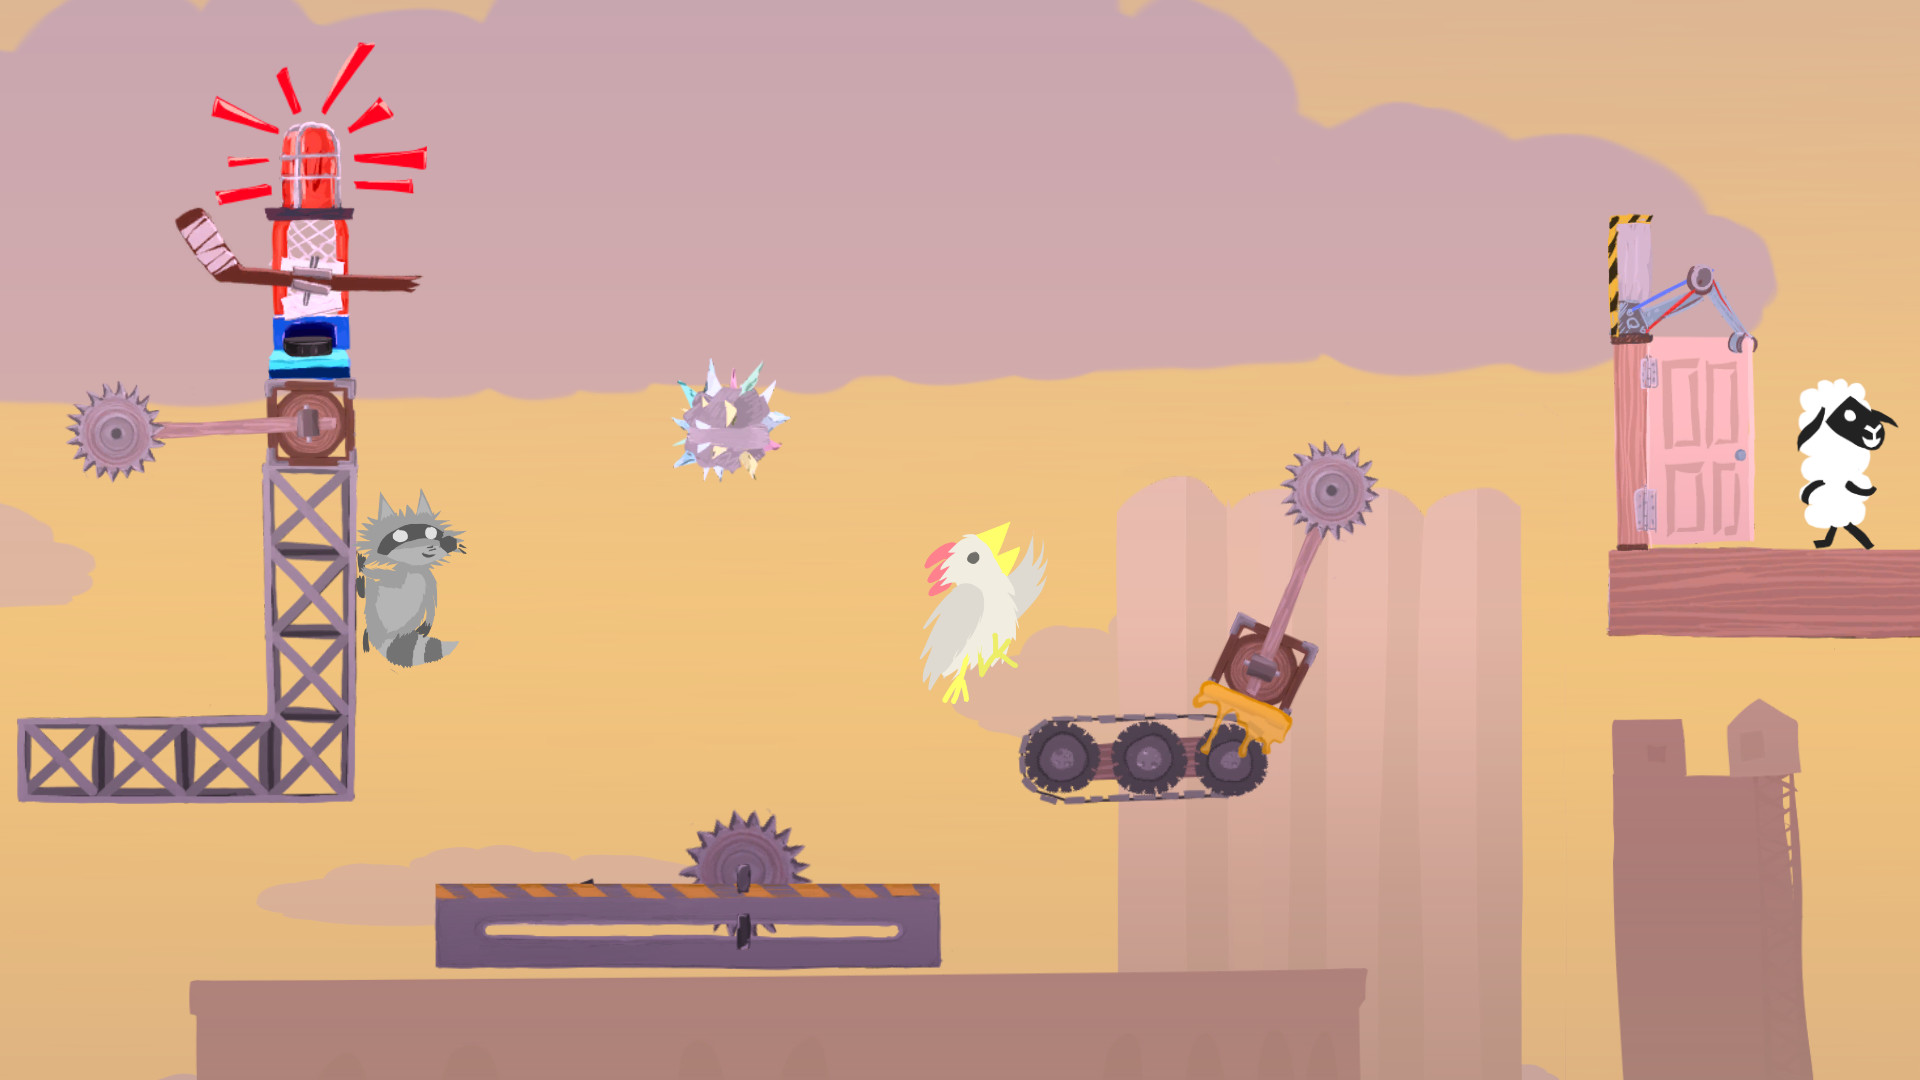 ultimate chicken horse game 2017 free download